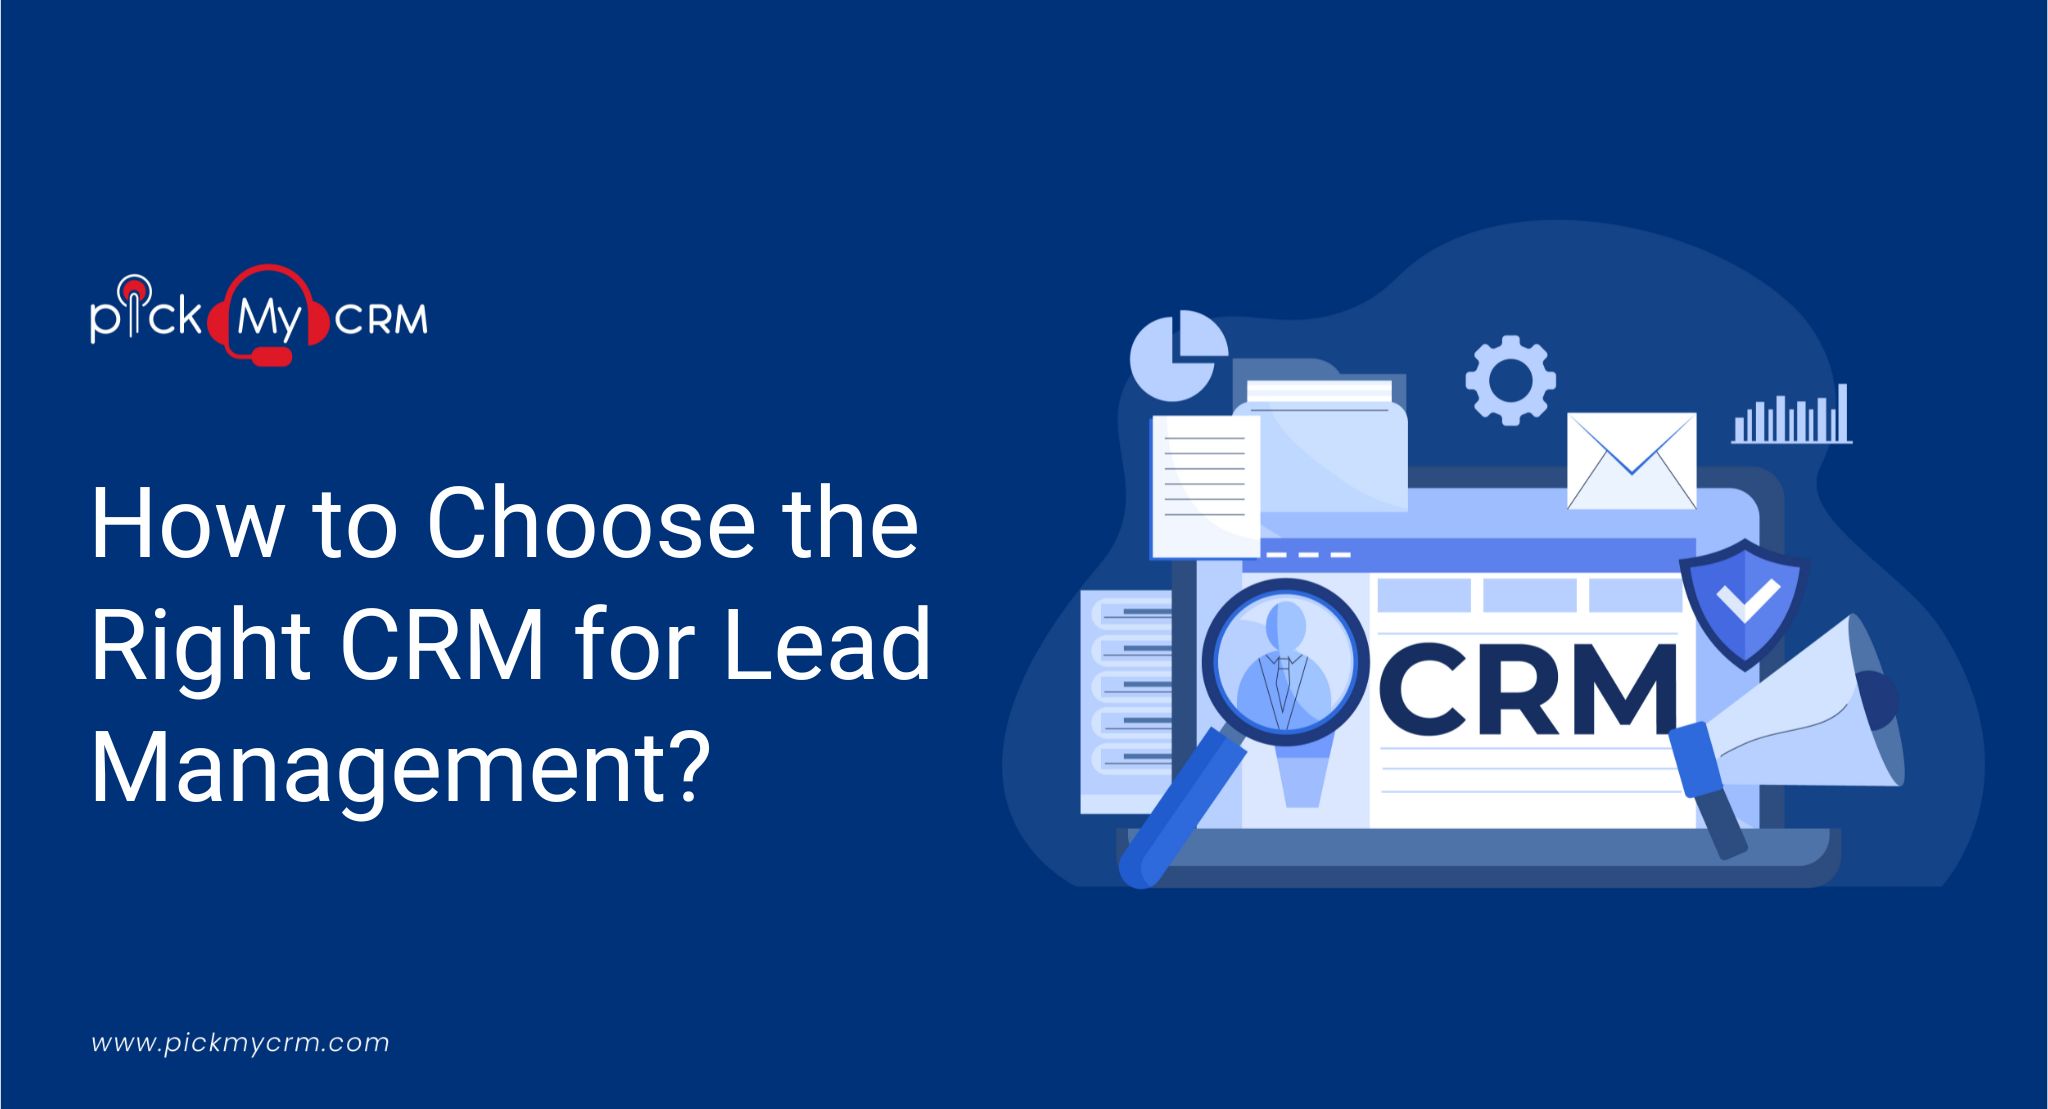 How to Choose the Right Lead Management CRM?